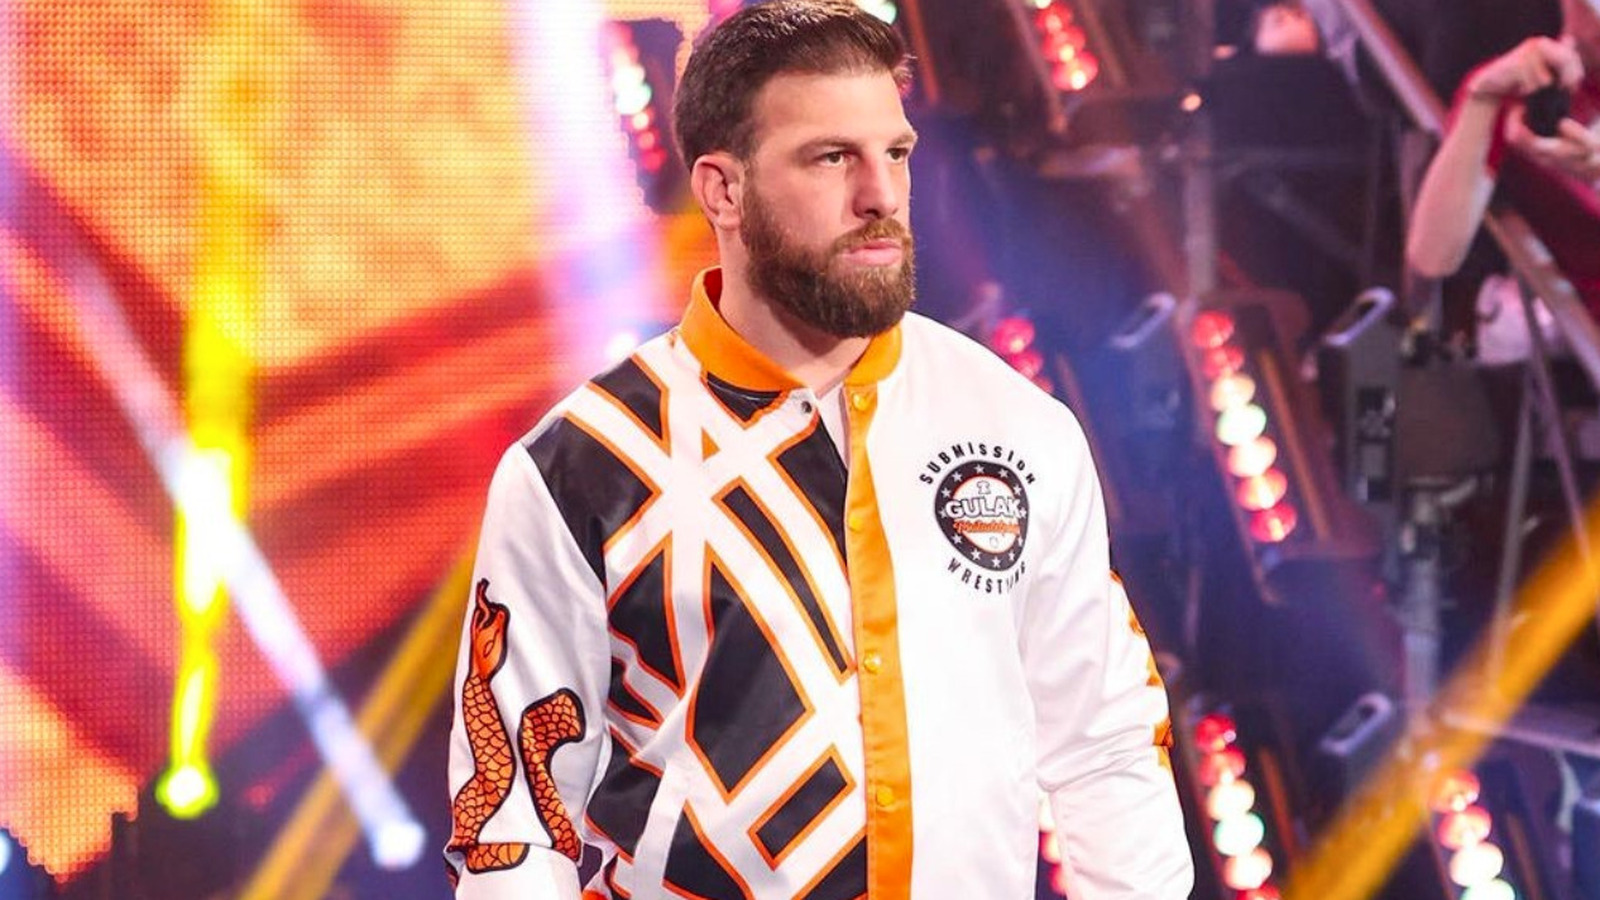 Backstage Details On Why WWE Isn't Re-Signing Drew Gulak